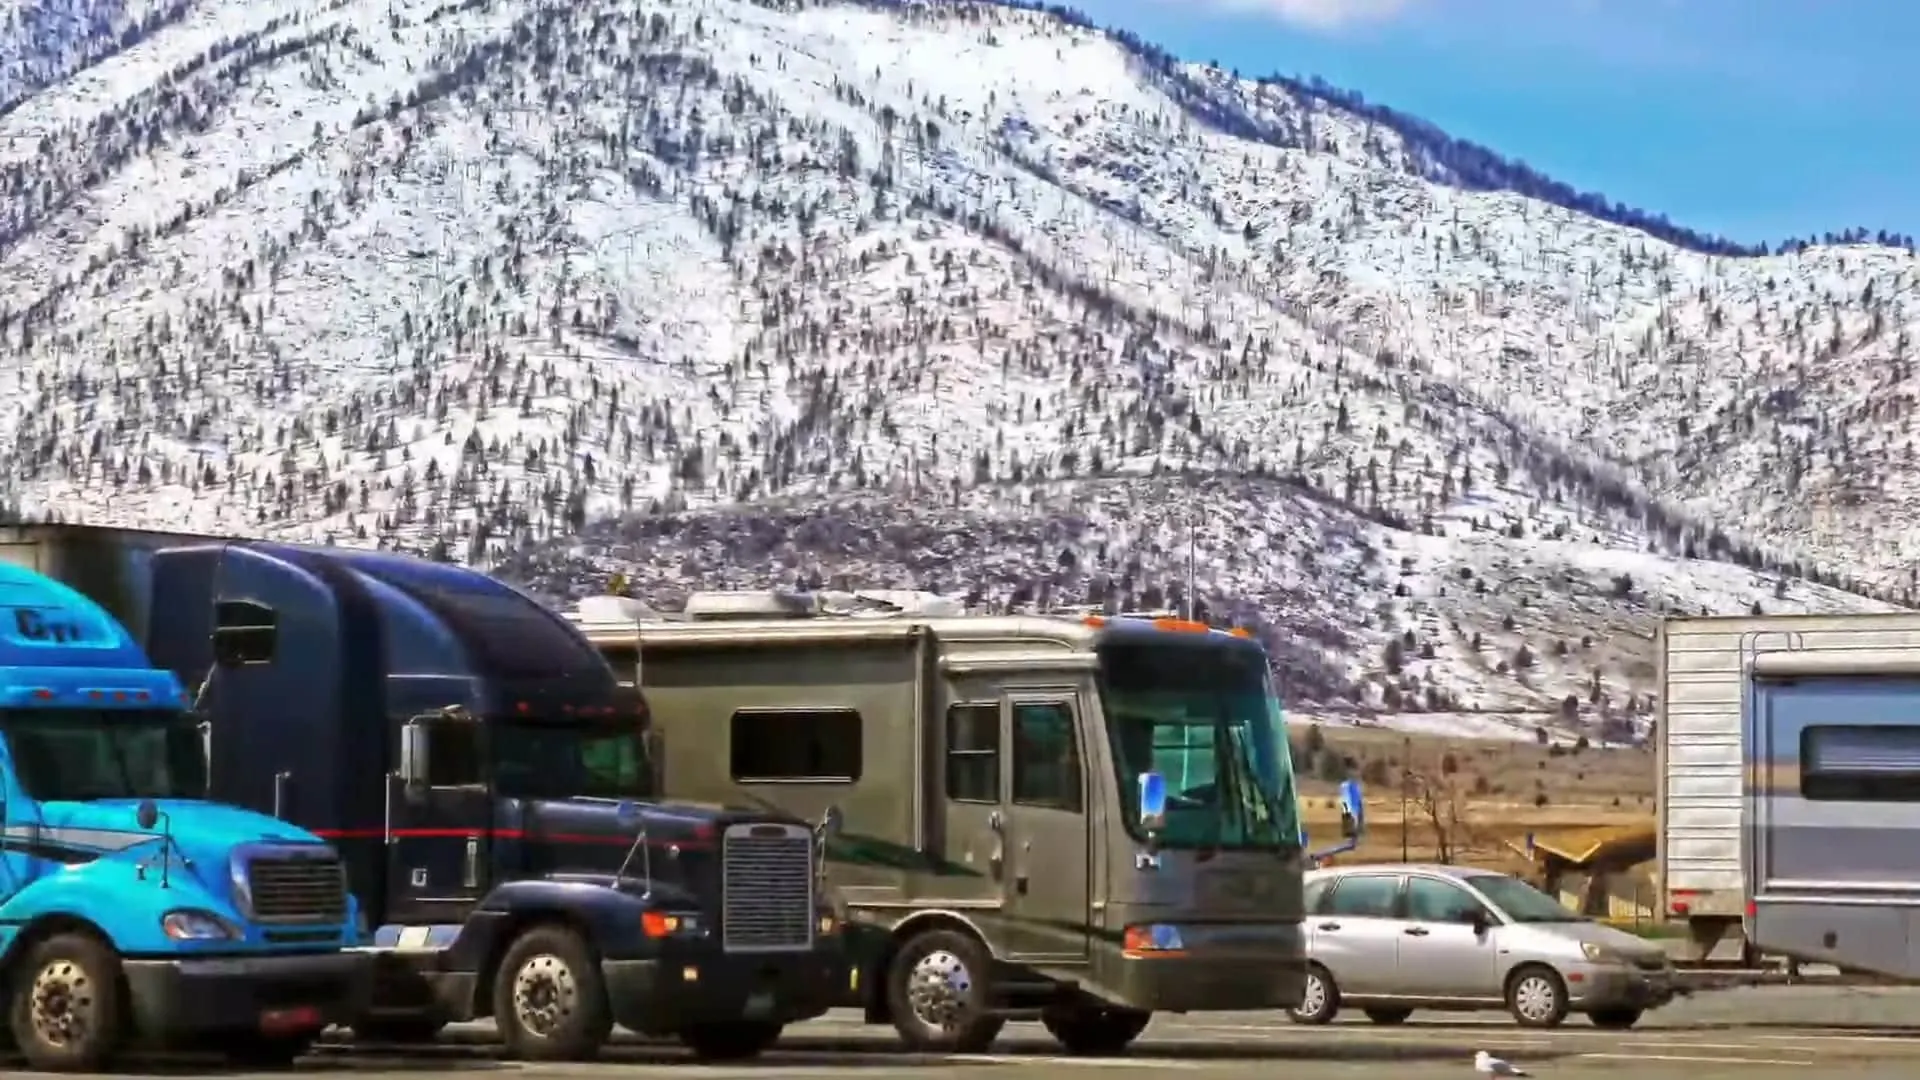 Truck stops offer free overnight rv parking for weary travelers.